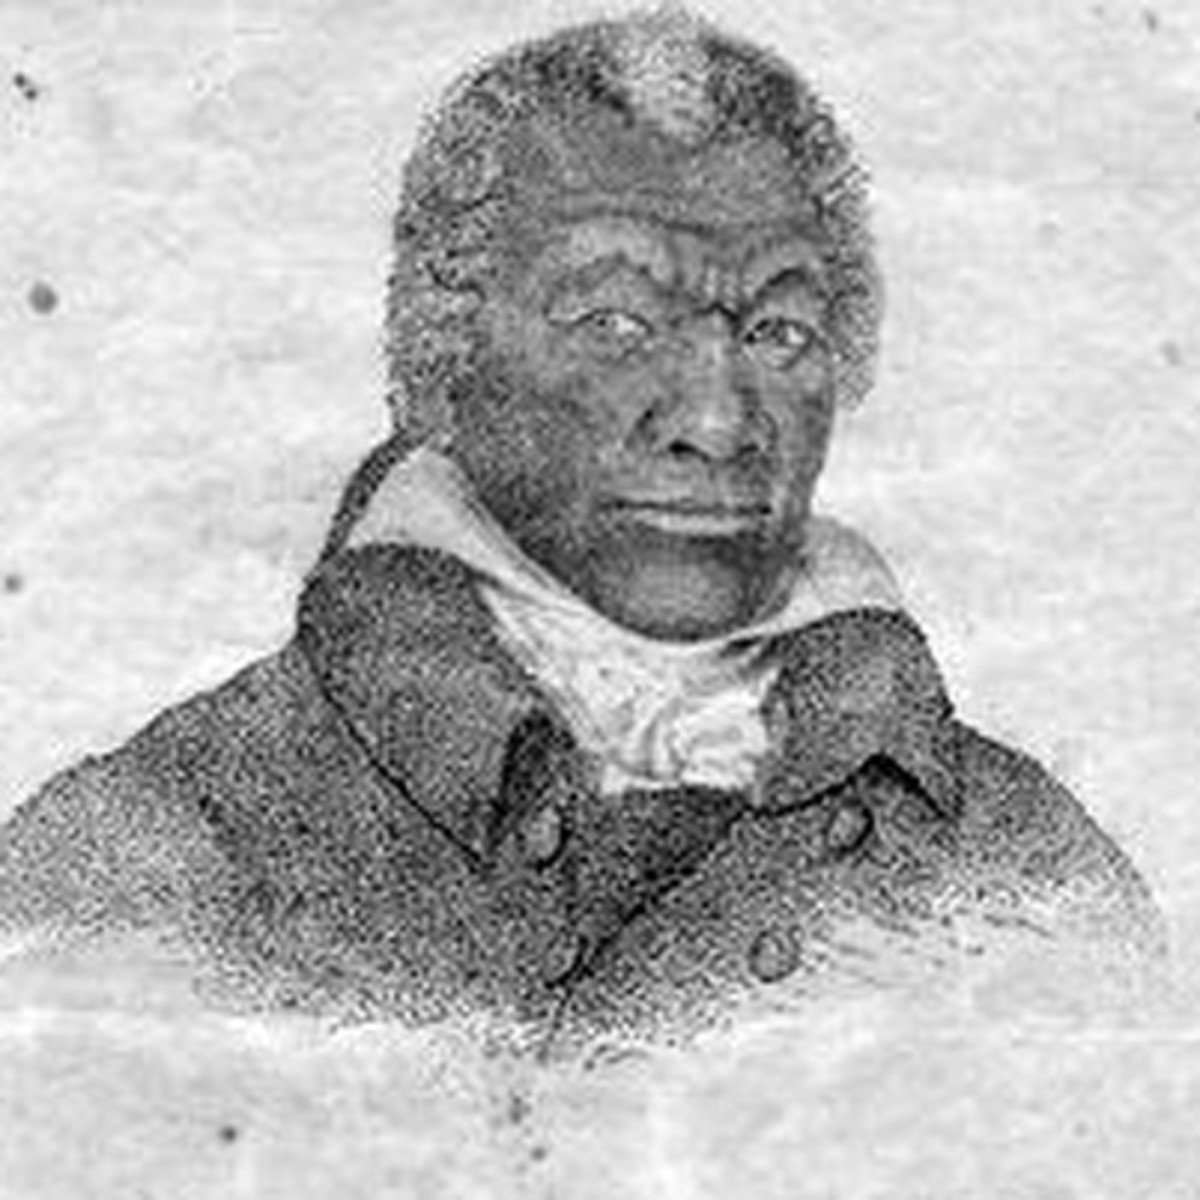 image for TIL of James Lafayette, a former slave who acted as a double agent during the American Revolution. He was able to travel freely between American and British camps, and foiled Benedict Arnold’s plan to storm Yorktown. This led to the British surrender.